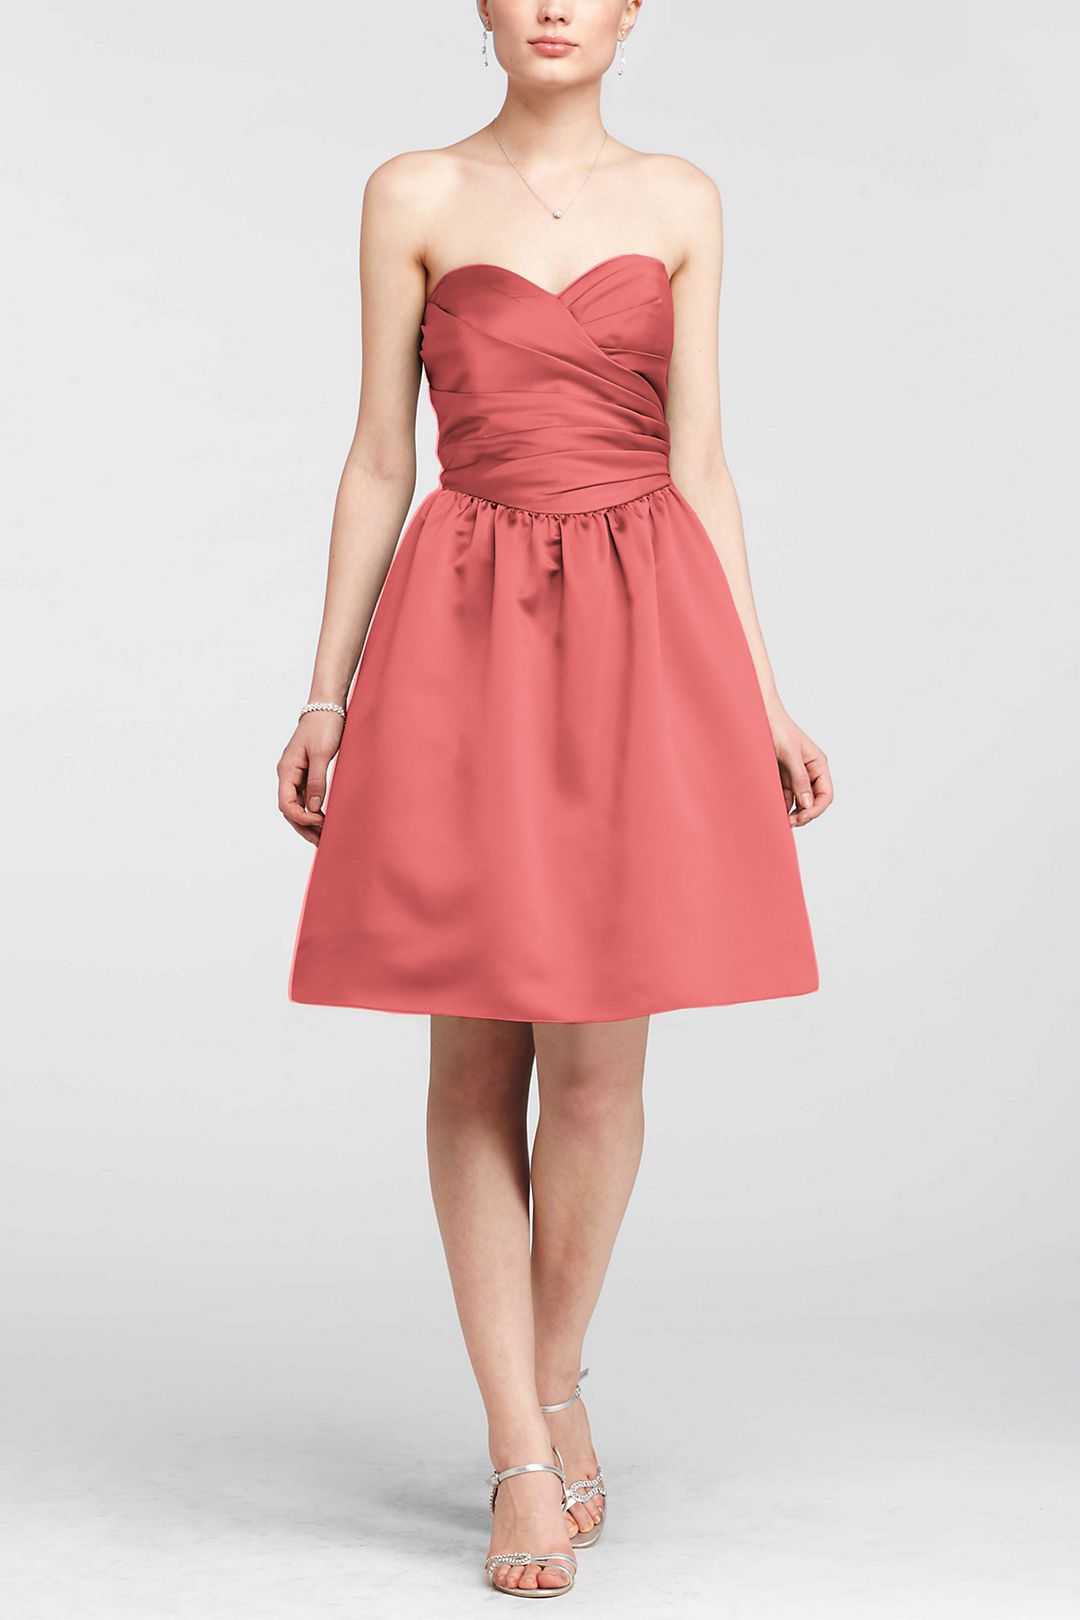 Sweetheart Satin Ruched Dress with Full Skirt Image 3